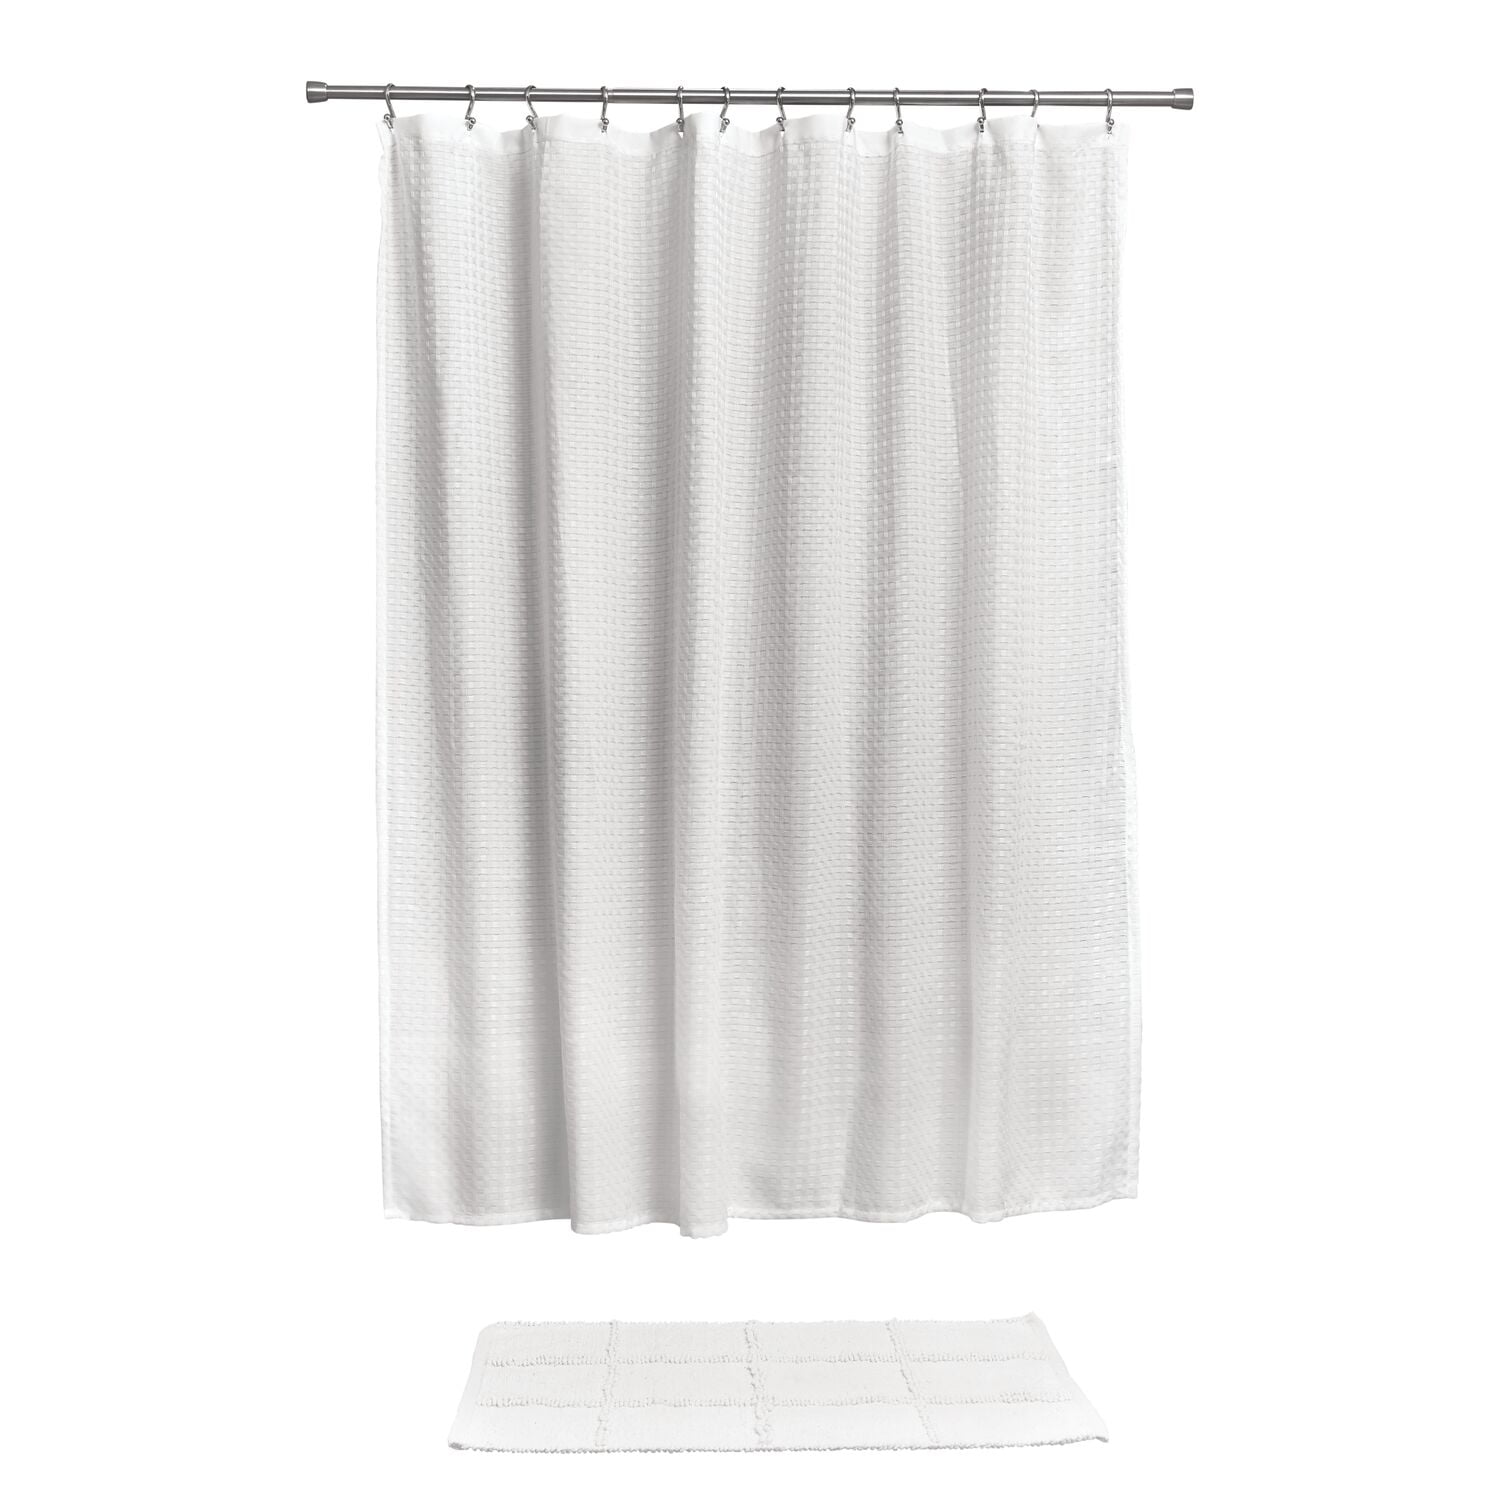 Textile Shower Curtain White 1800mm by 1800mm MX Group Machine Washable Fabric 